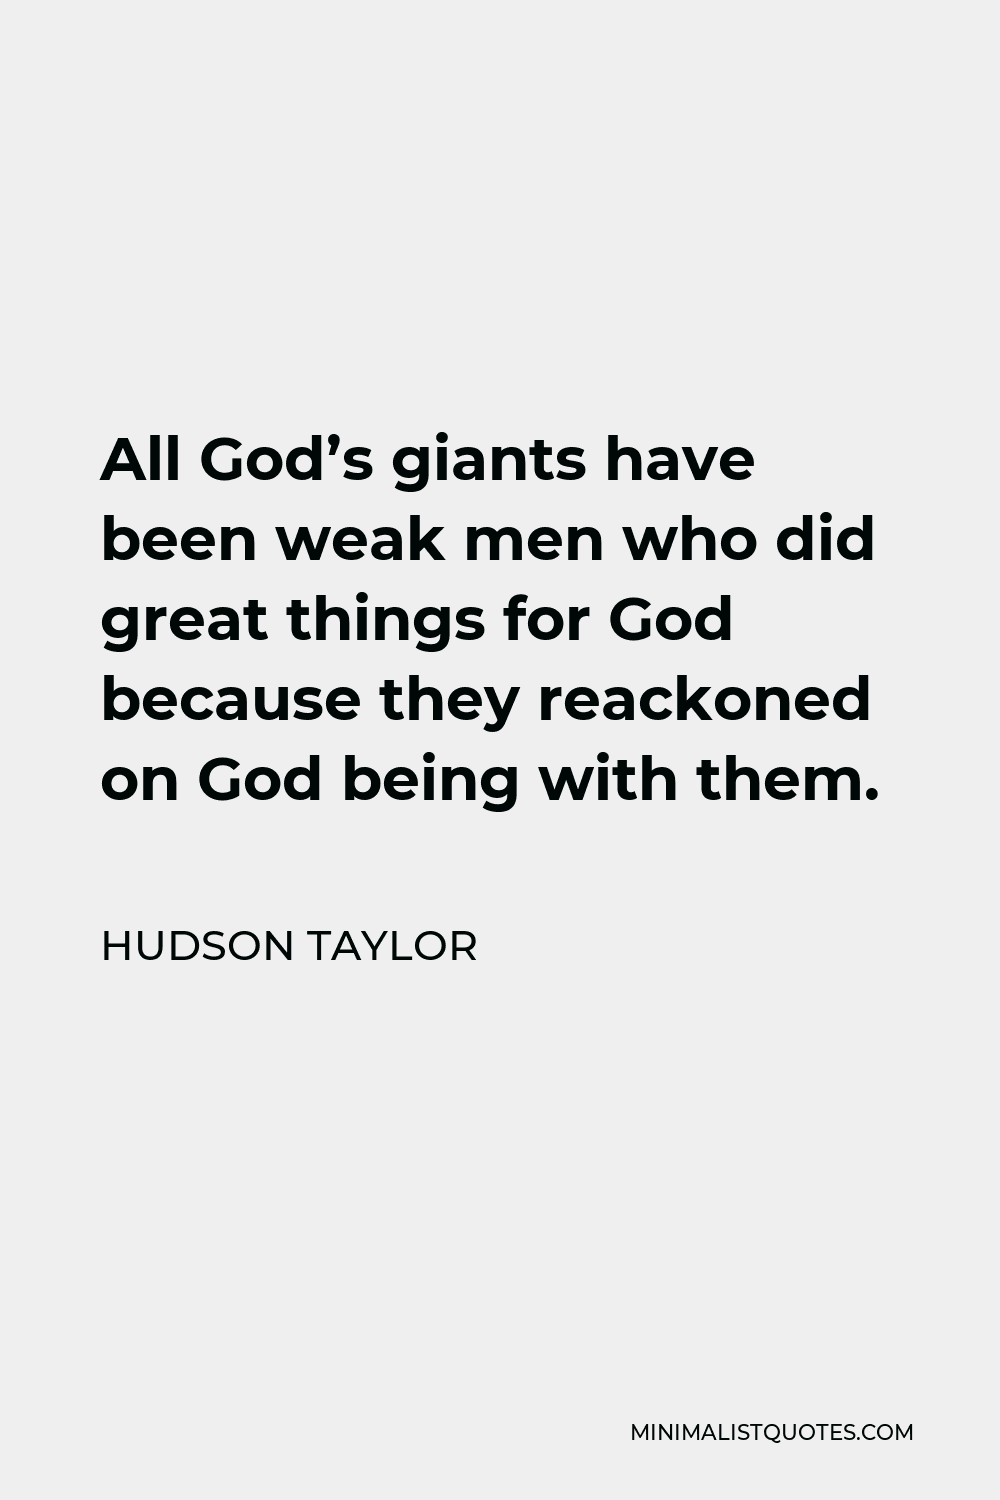 Hudson Taylor Quote - All God’s giants have been weak men who did great things for God because they reackoned on God being with them.